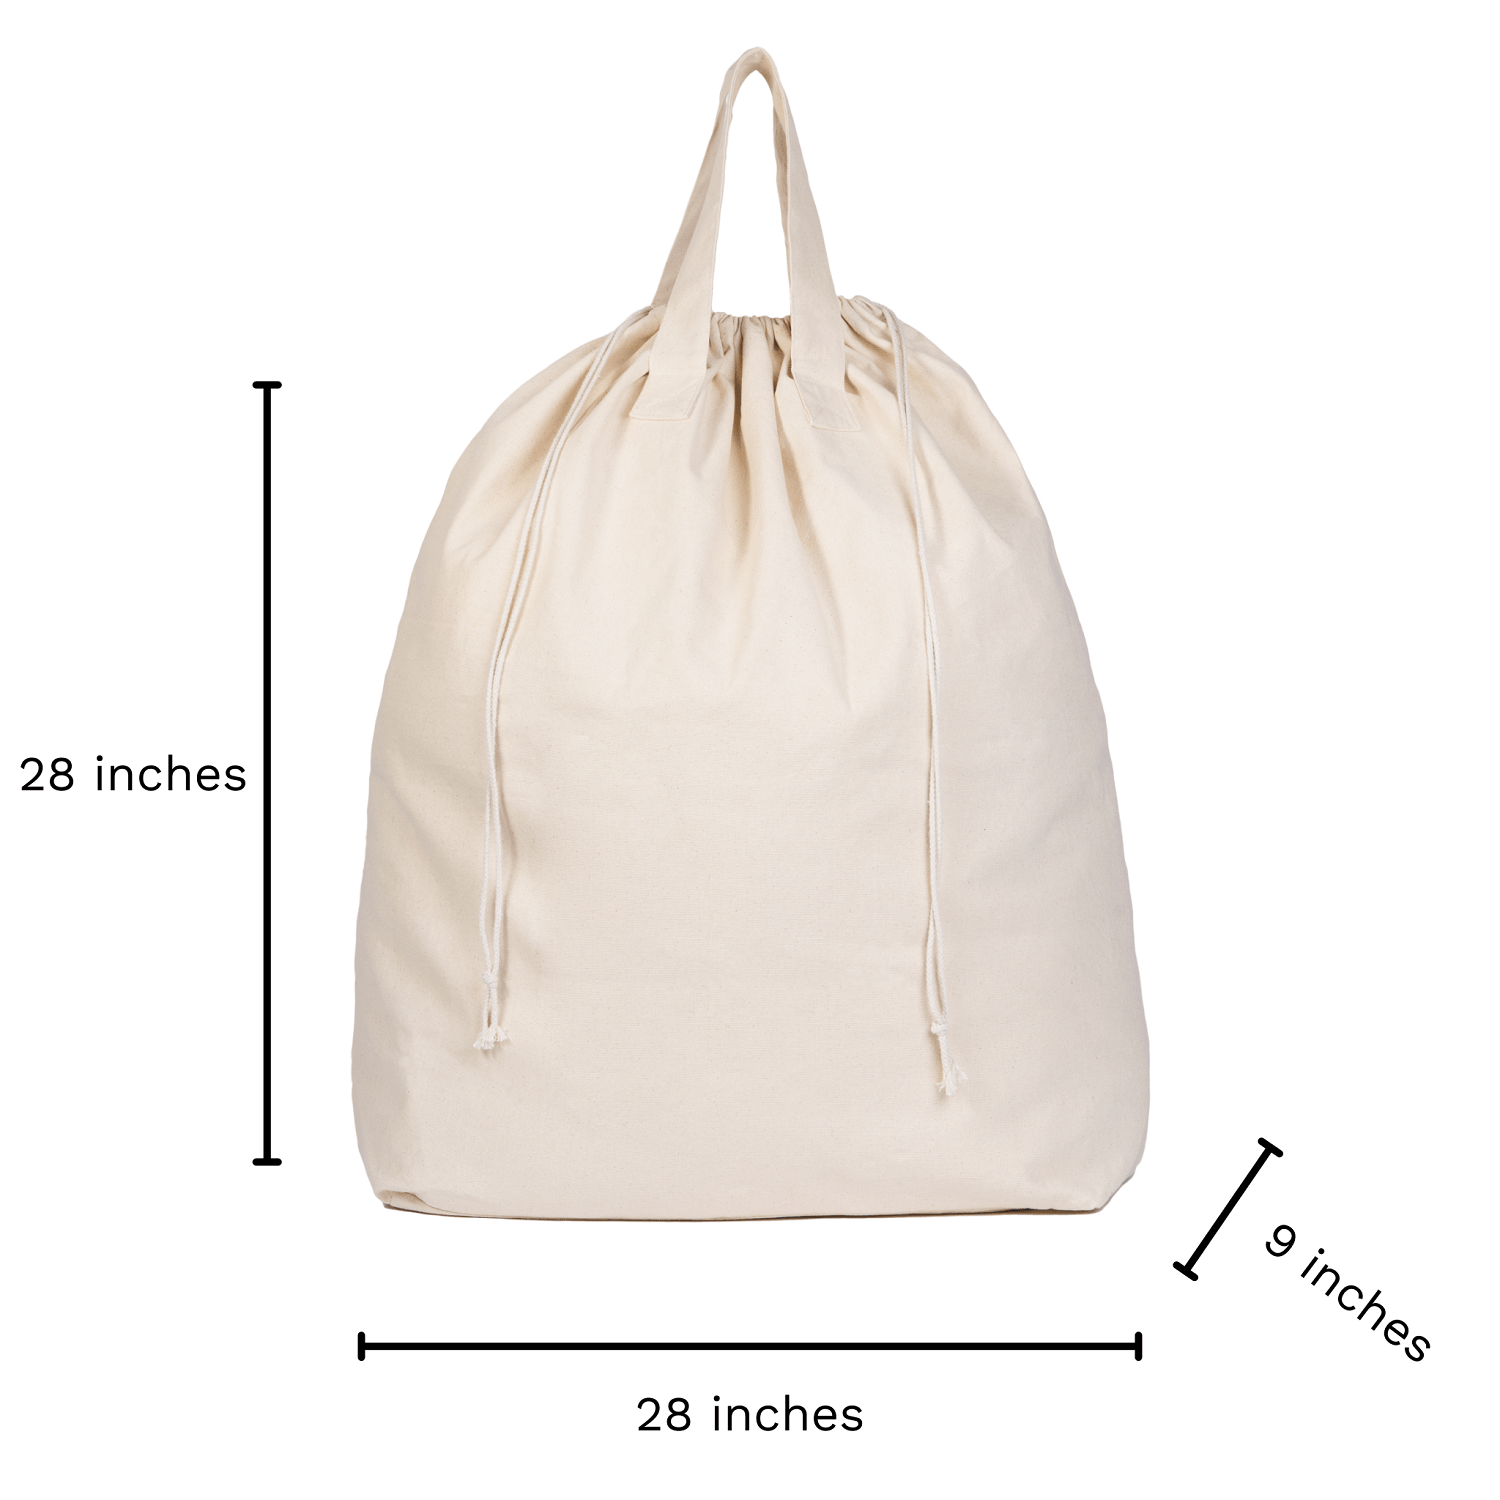 perfect Laundry Bags dimensions